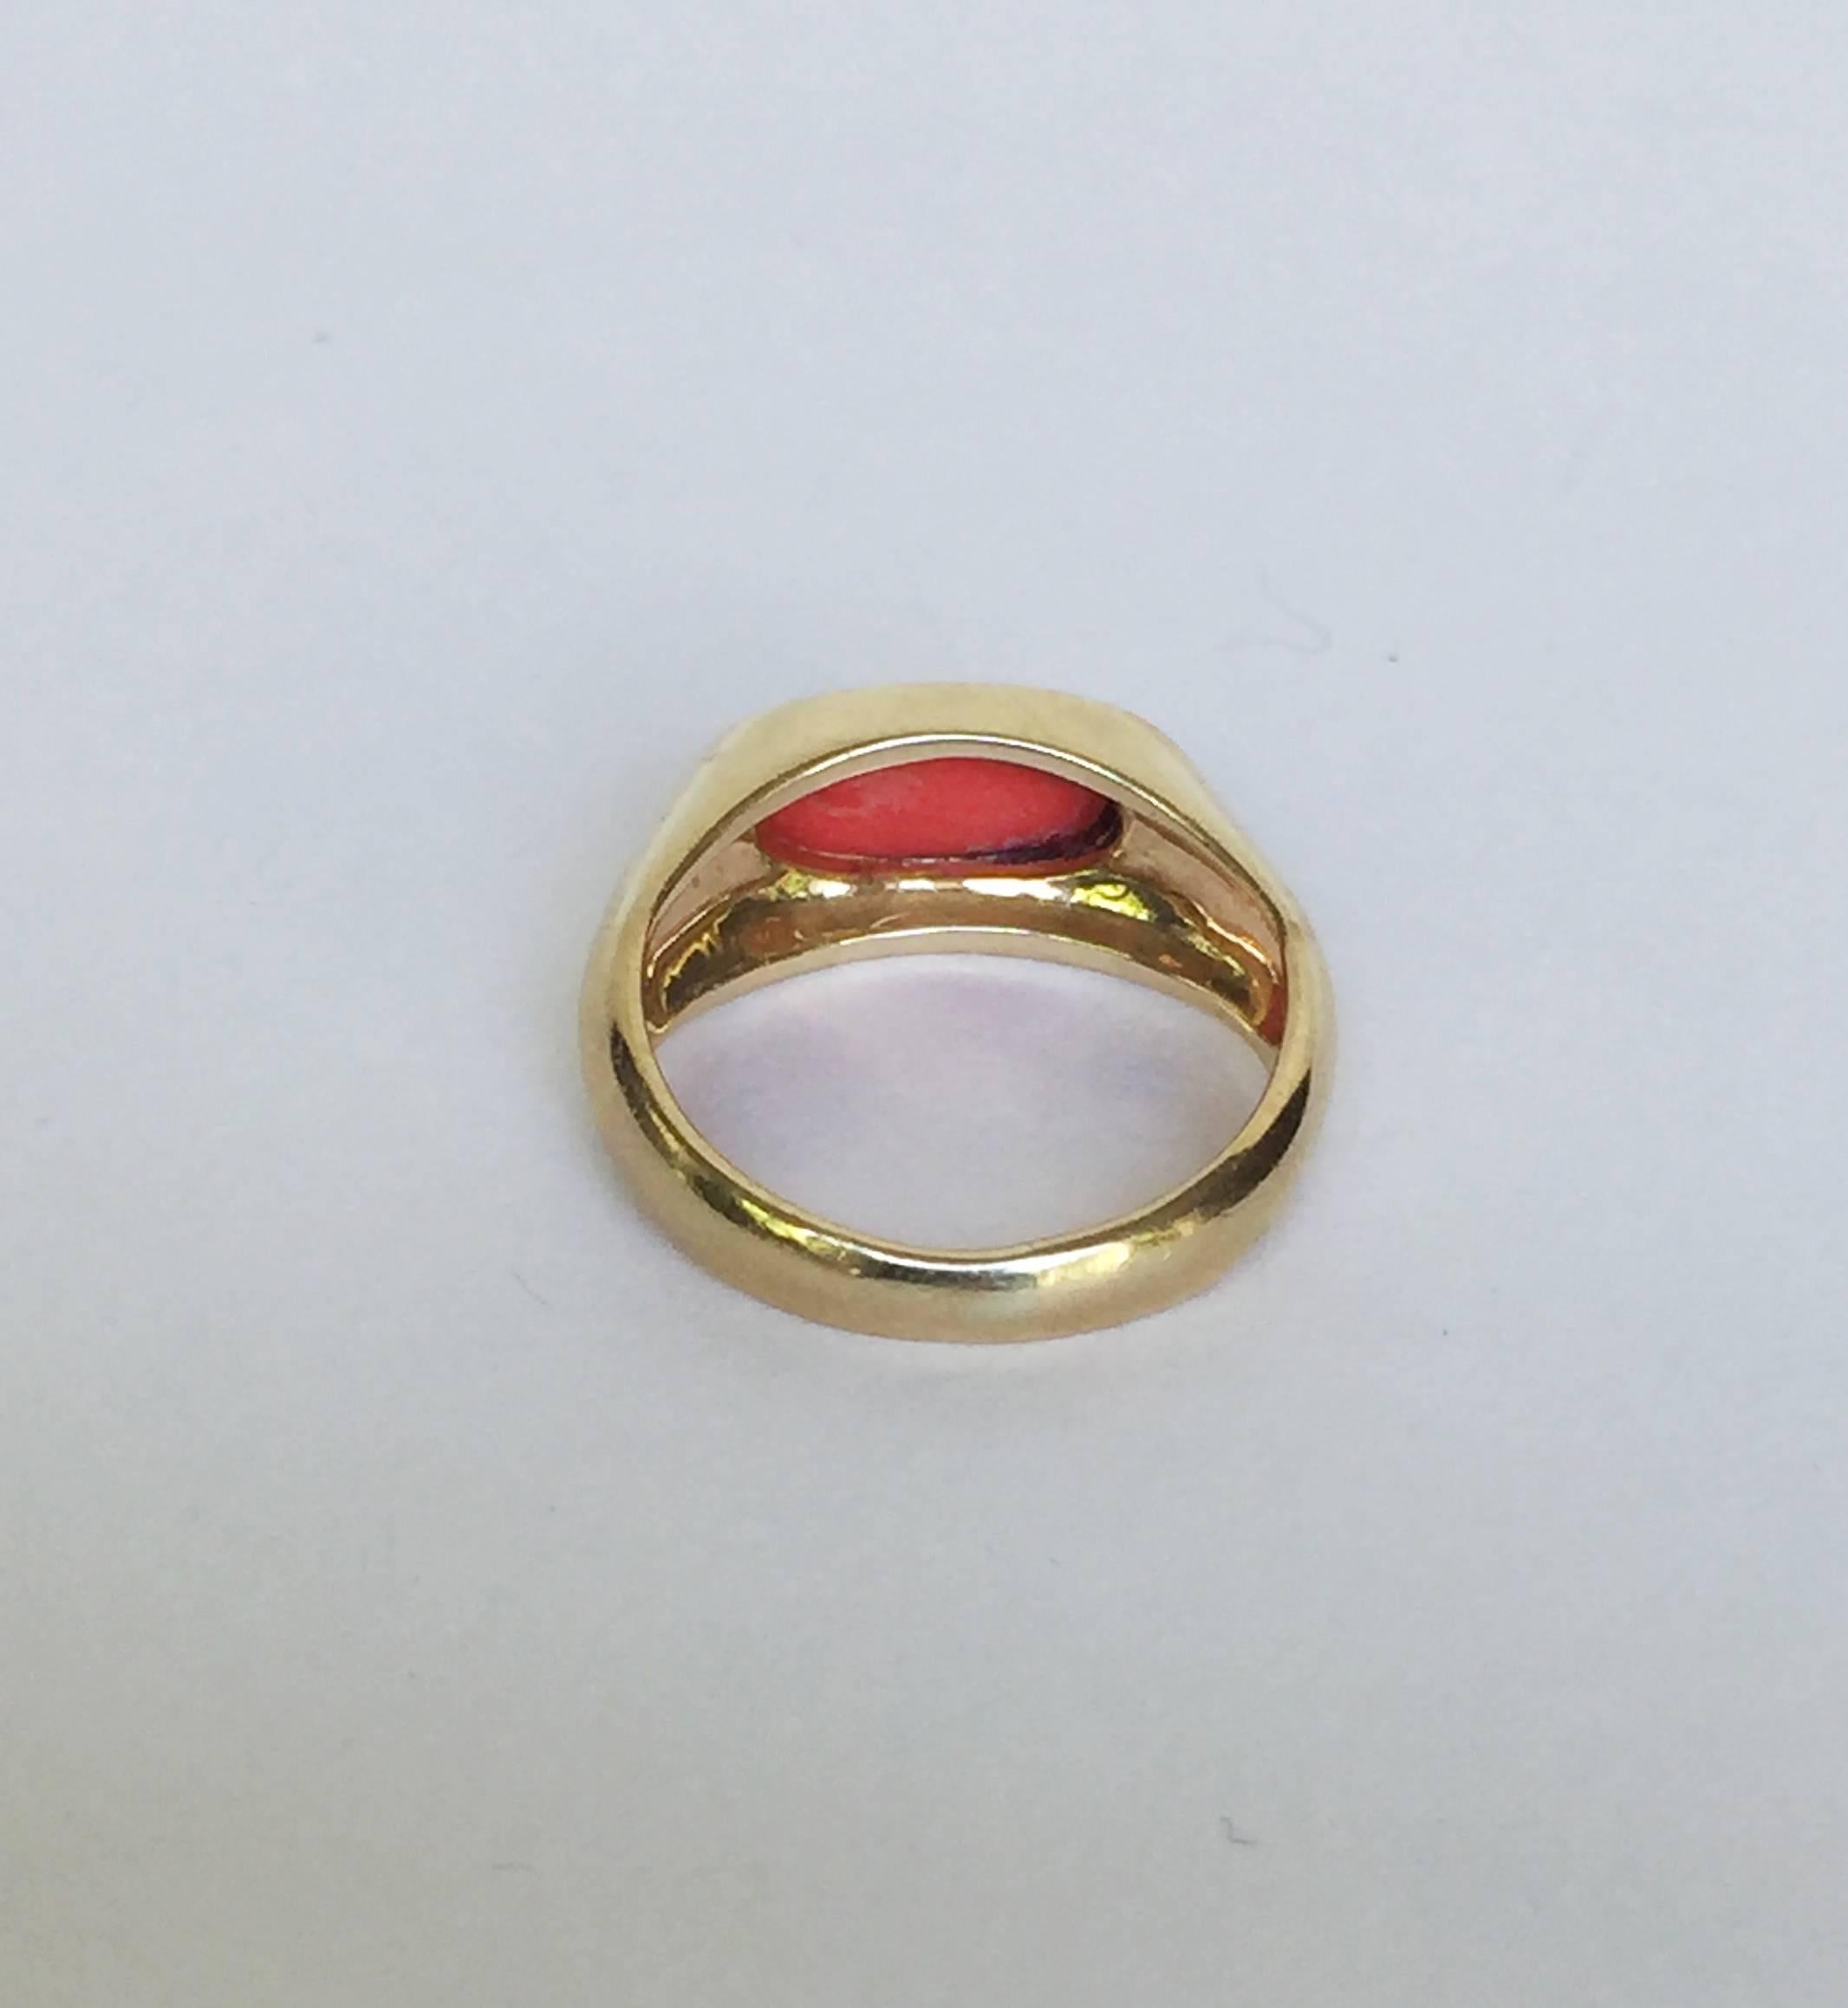 This simple and elegant pinky ring is original from the 1950s. The ring has a distinguished look. The coral center has a rich warm pink color accentuated by the 14k gold band.The size is 4.25